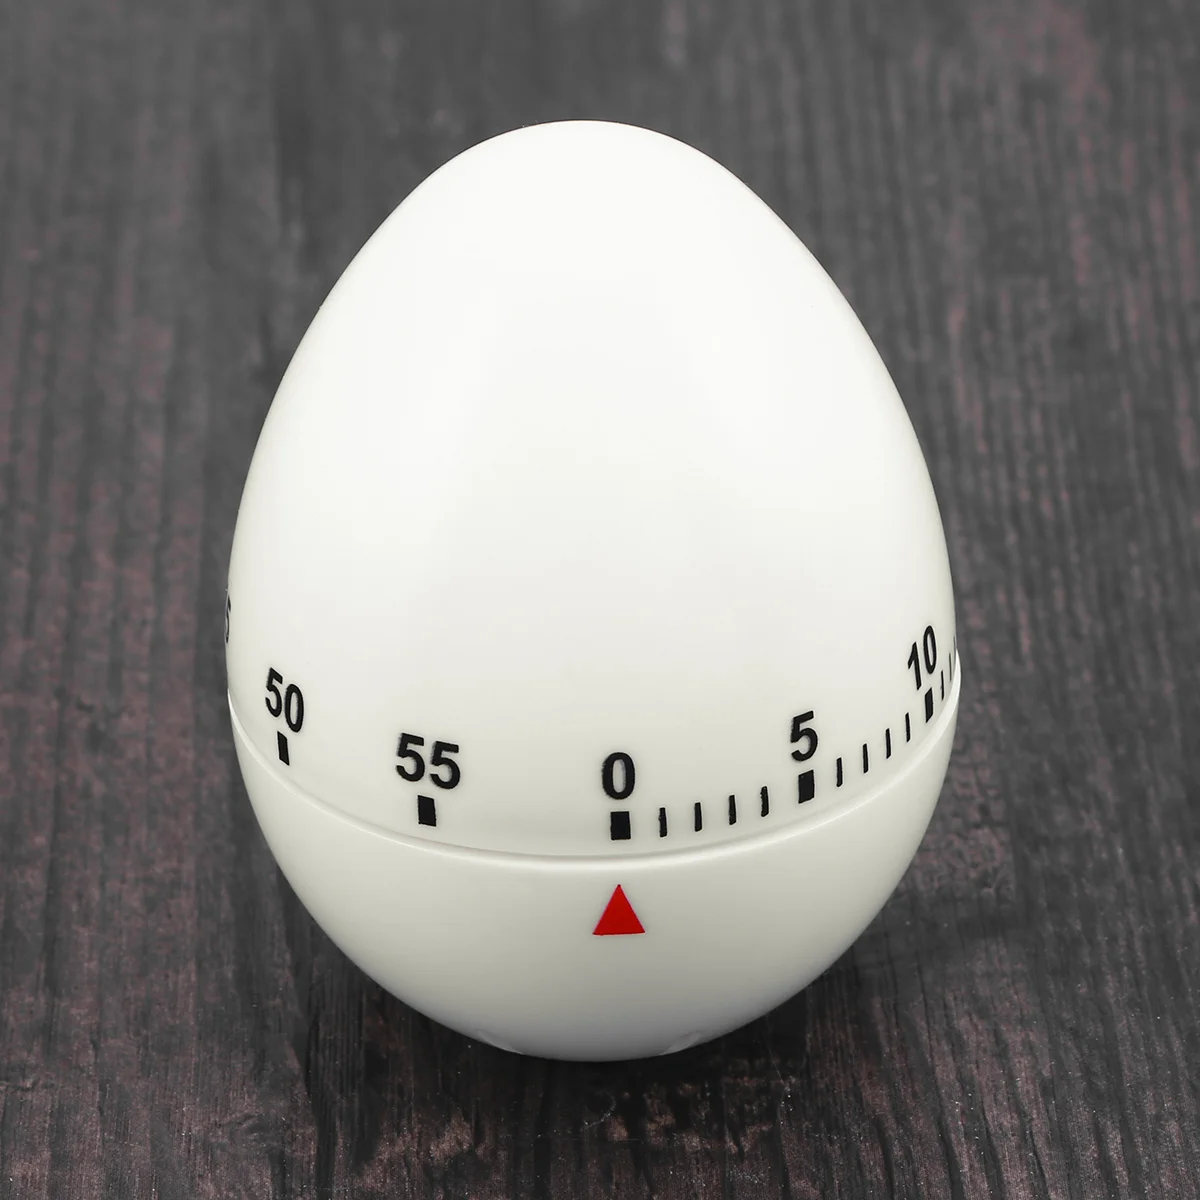 

2 Pcs Practical Egg Shape Mechanical Rotate Timer Household Countdown Timer Manual Cooking Kitchen Reminder (White,